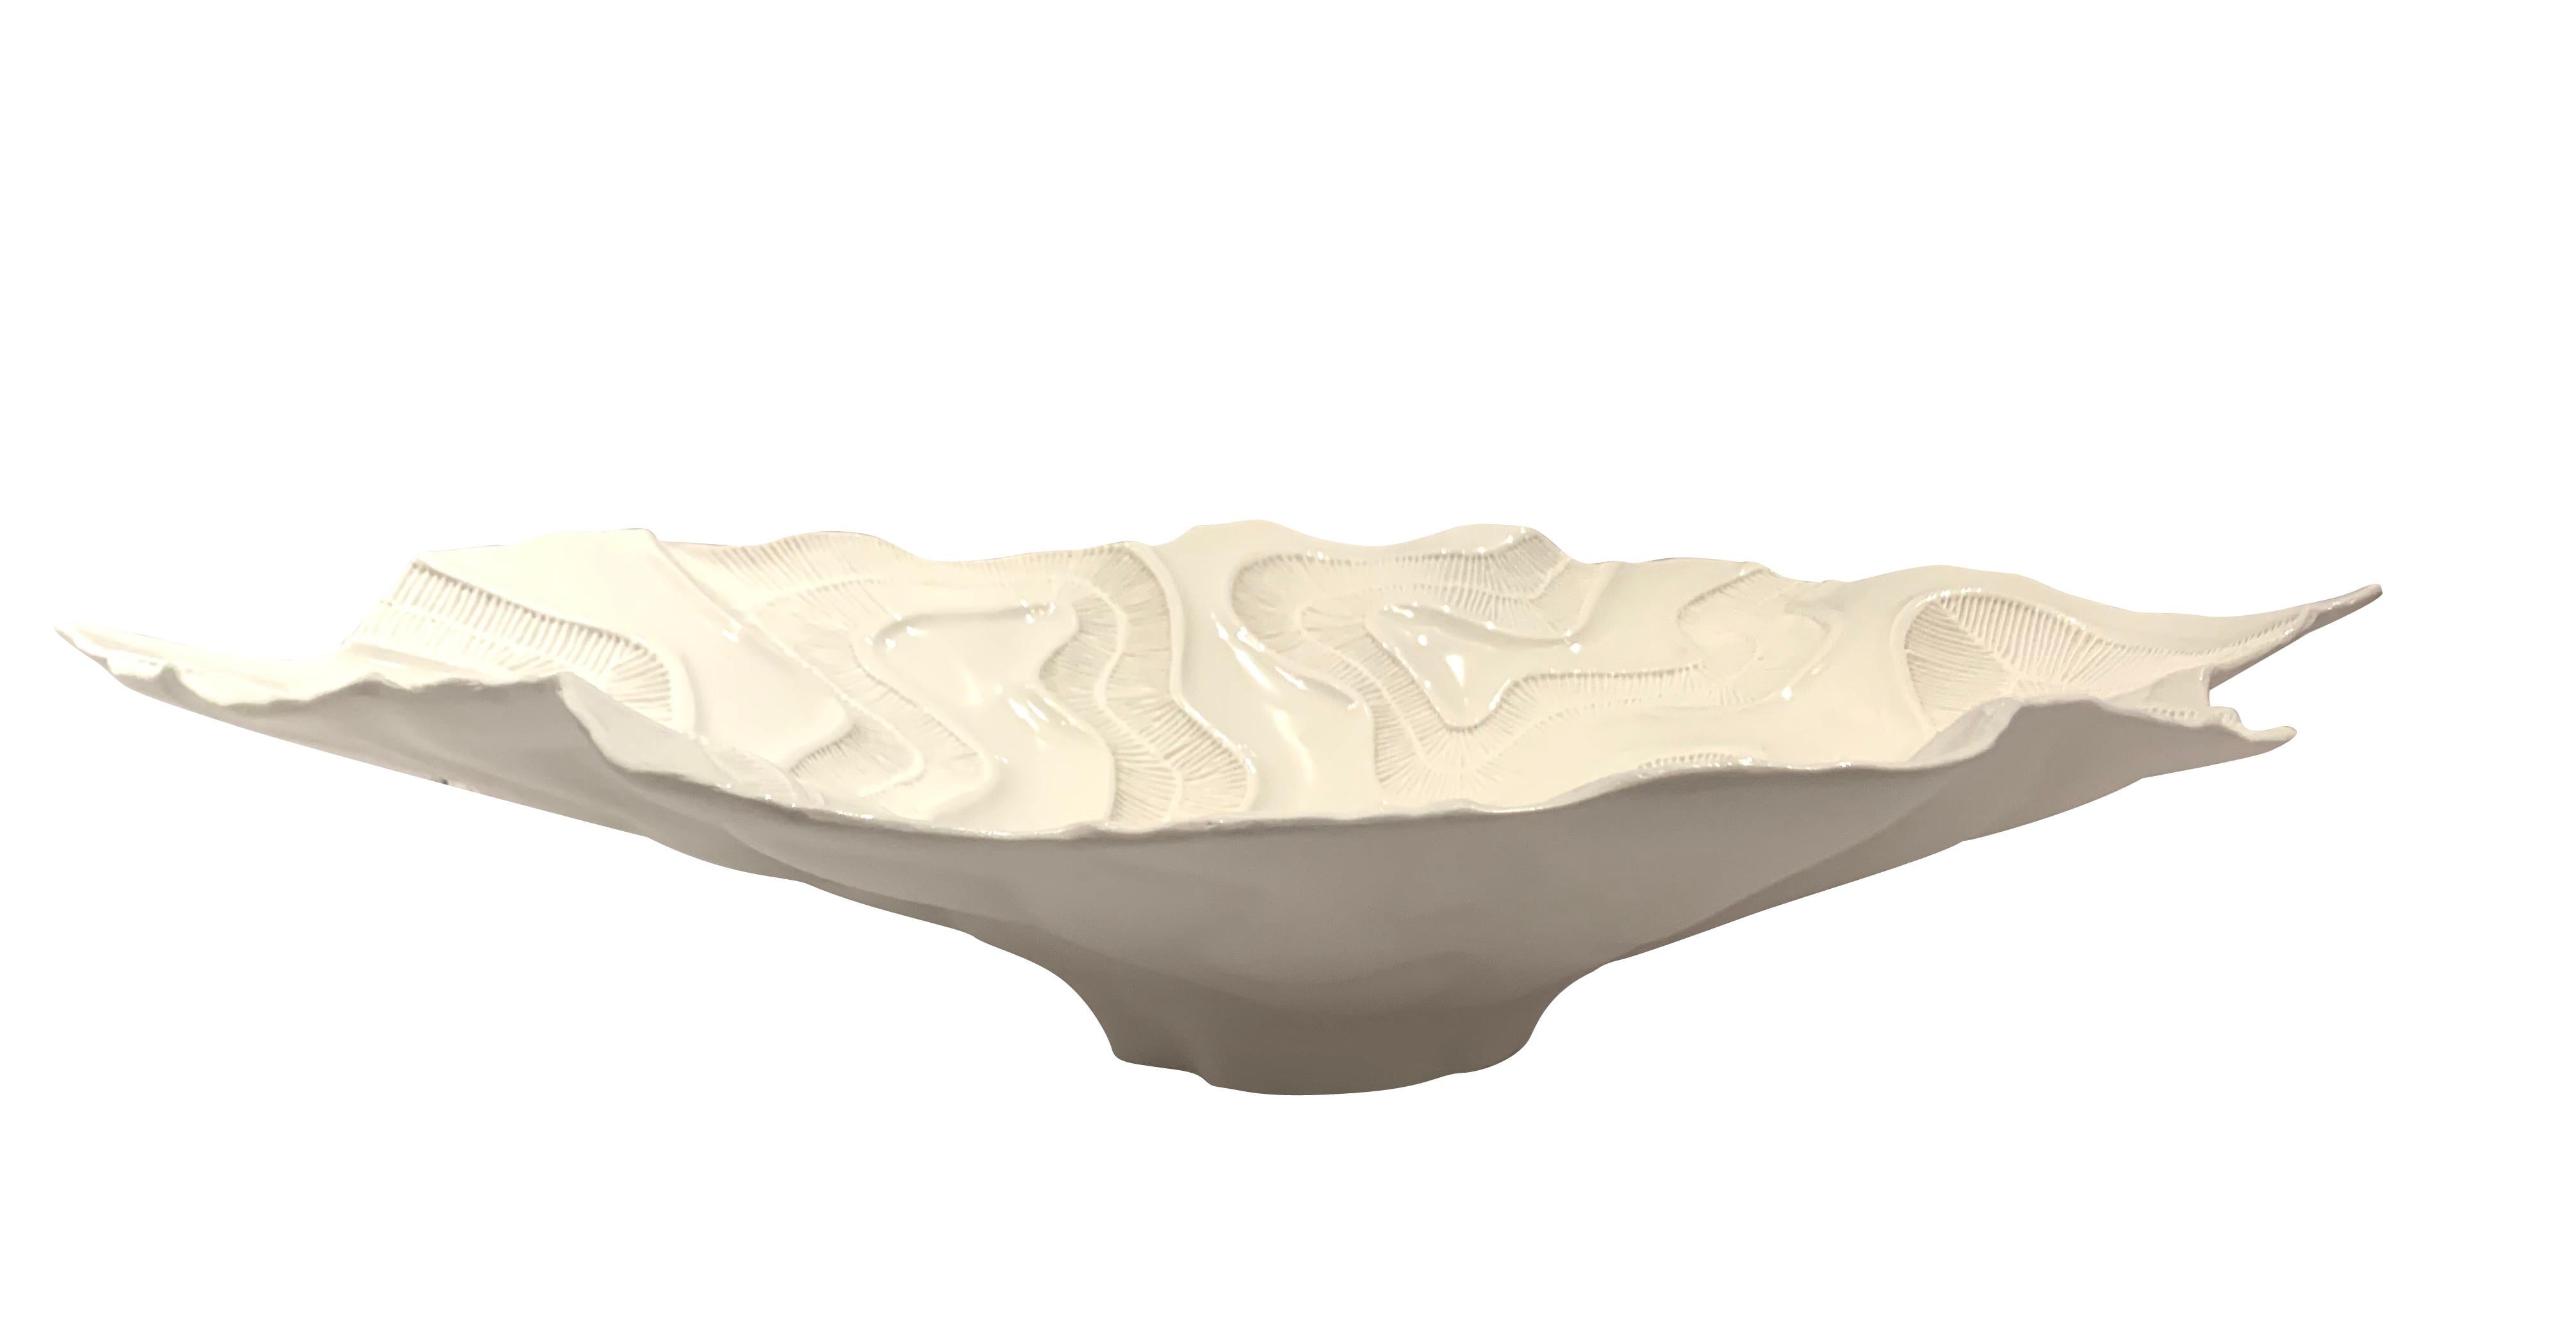 Contemporary Italian white porcelain bowl with decorative white coral motif details.
Organic free form shape.
Also available in white with gold details (S5788), and white with platinum details (S5792)
ARRIVAL TBD.